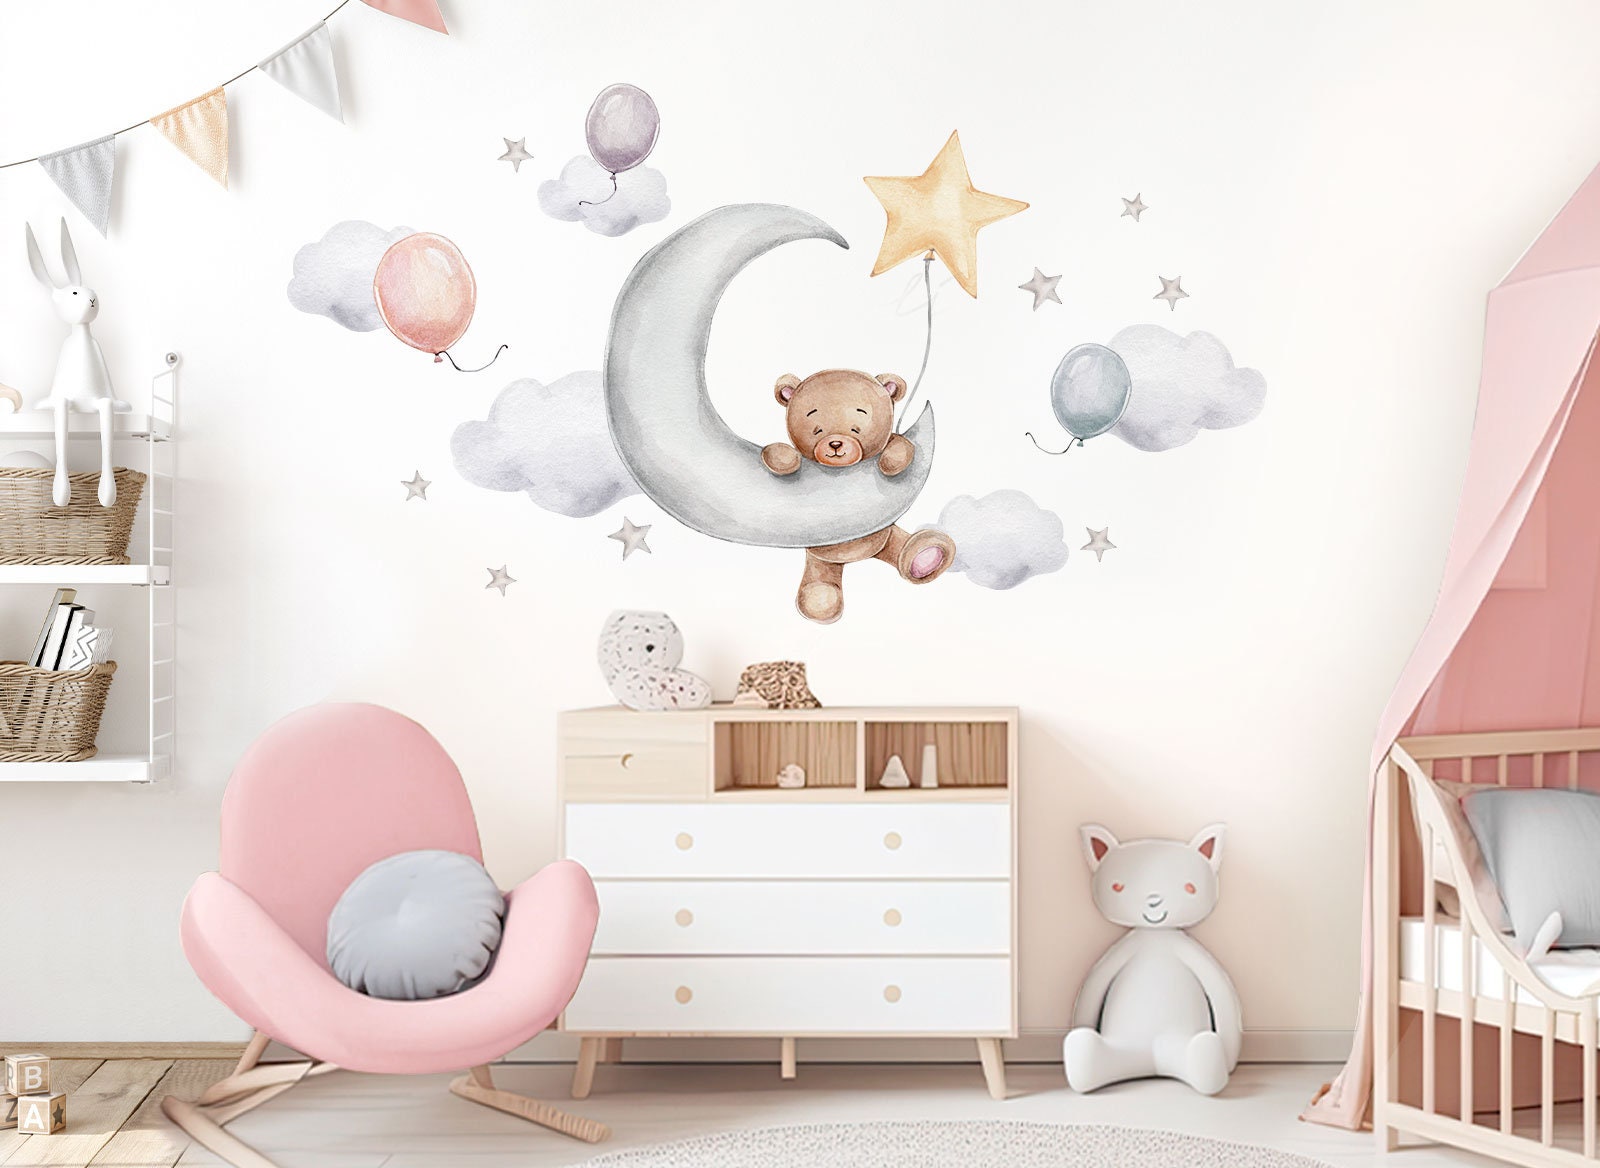 Stickers Muraux Enfants Toise Ours Lapin Chat Autocollant Mural